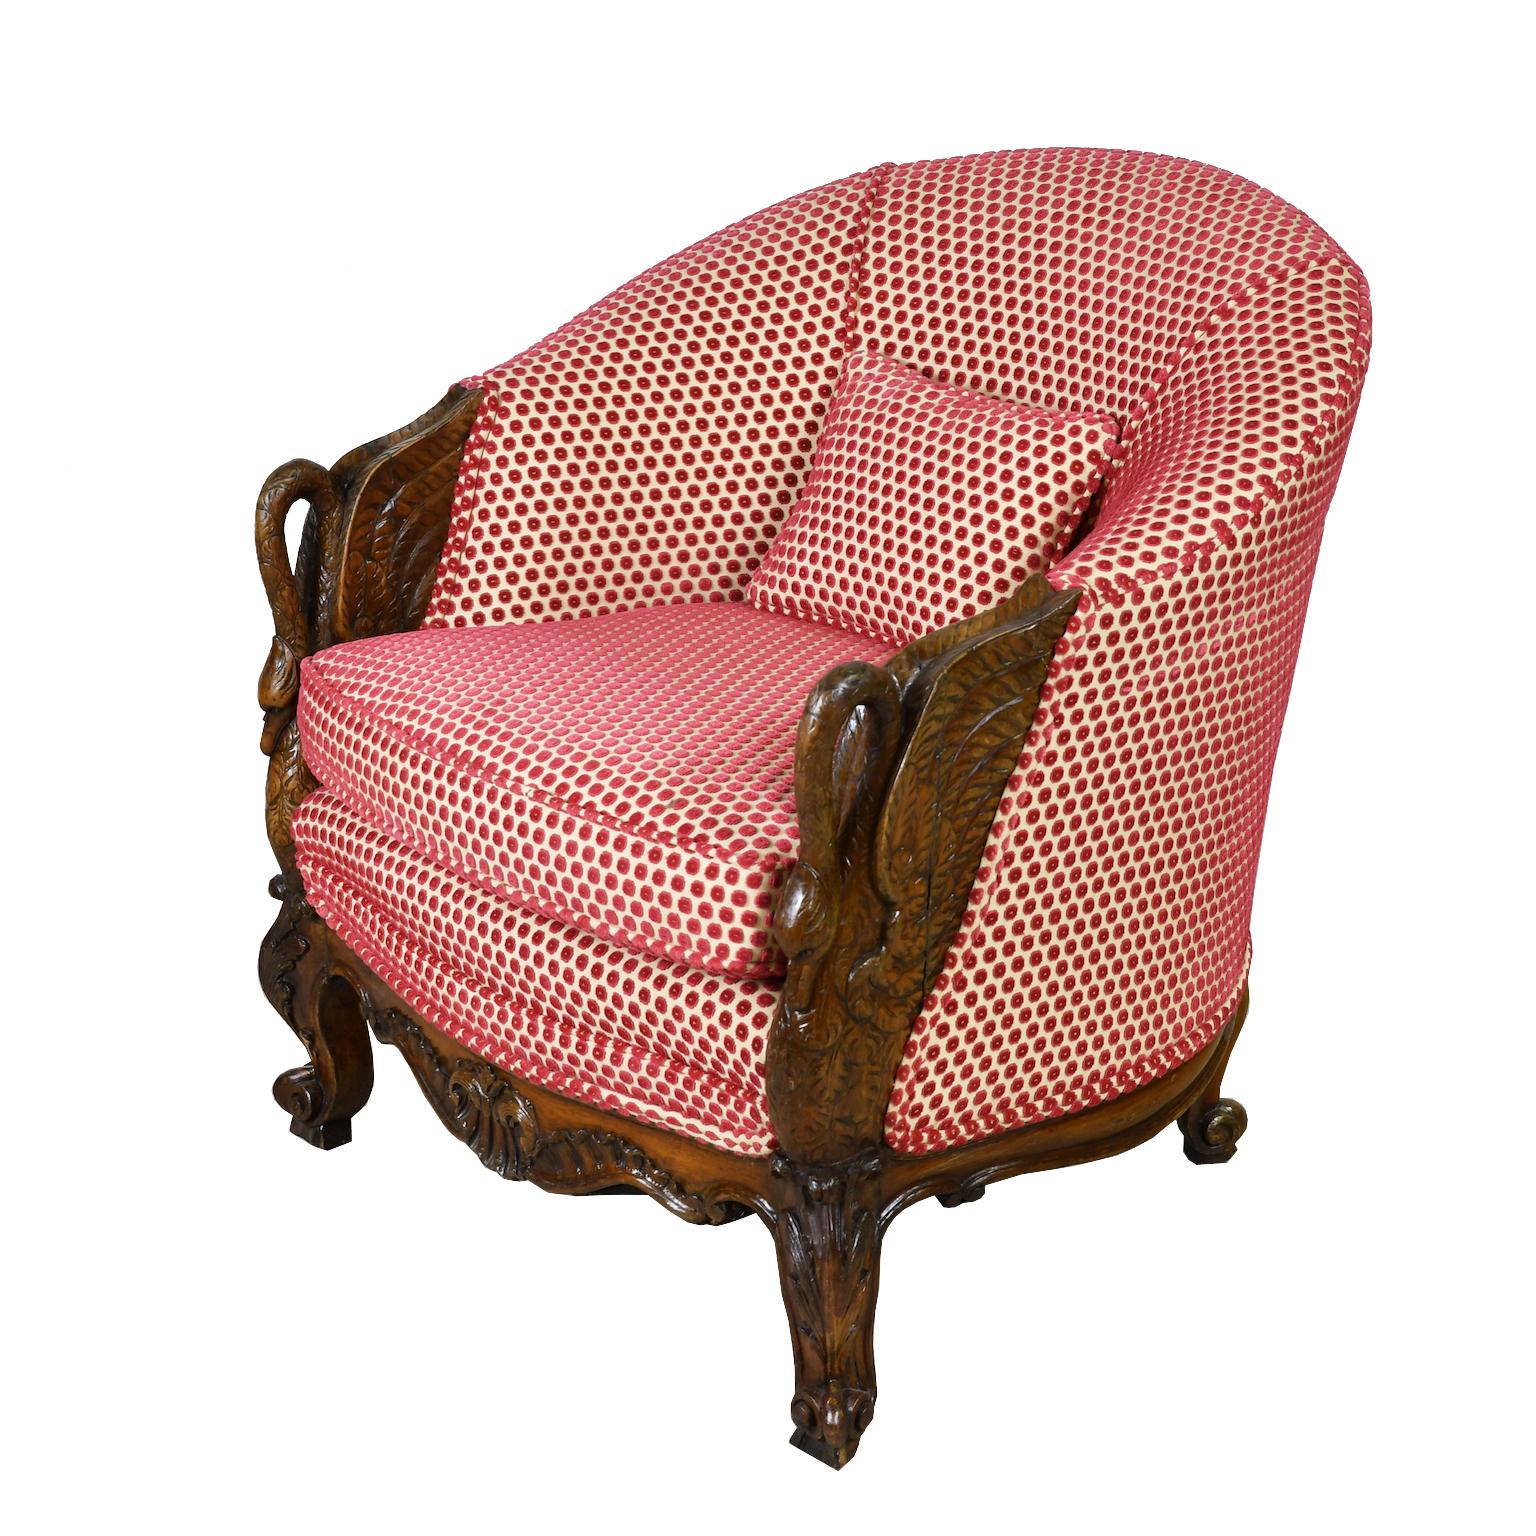 A very beautiful club chair with gondola form featuring finely carved arms in the shape of swans with tucked head and outstretched wings. Chair rests on acanthus-carved scroll feet with rocaille-work on apron. Upholstered in a fine rose polka-dot,